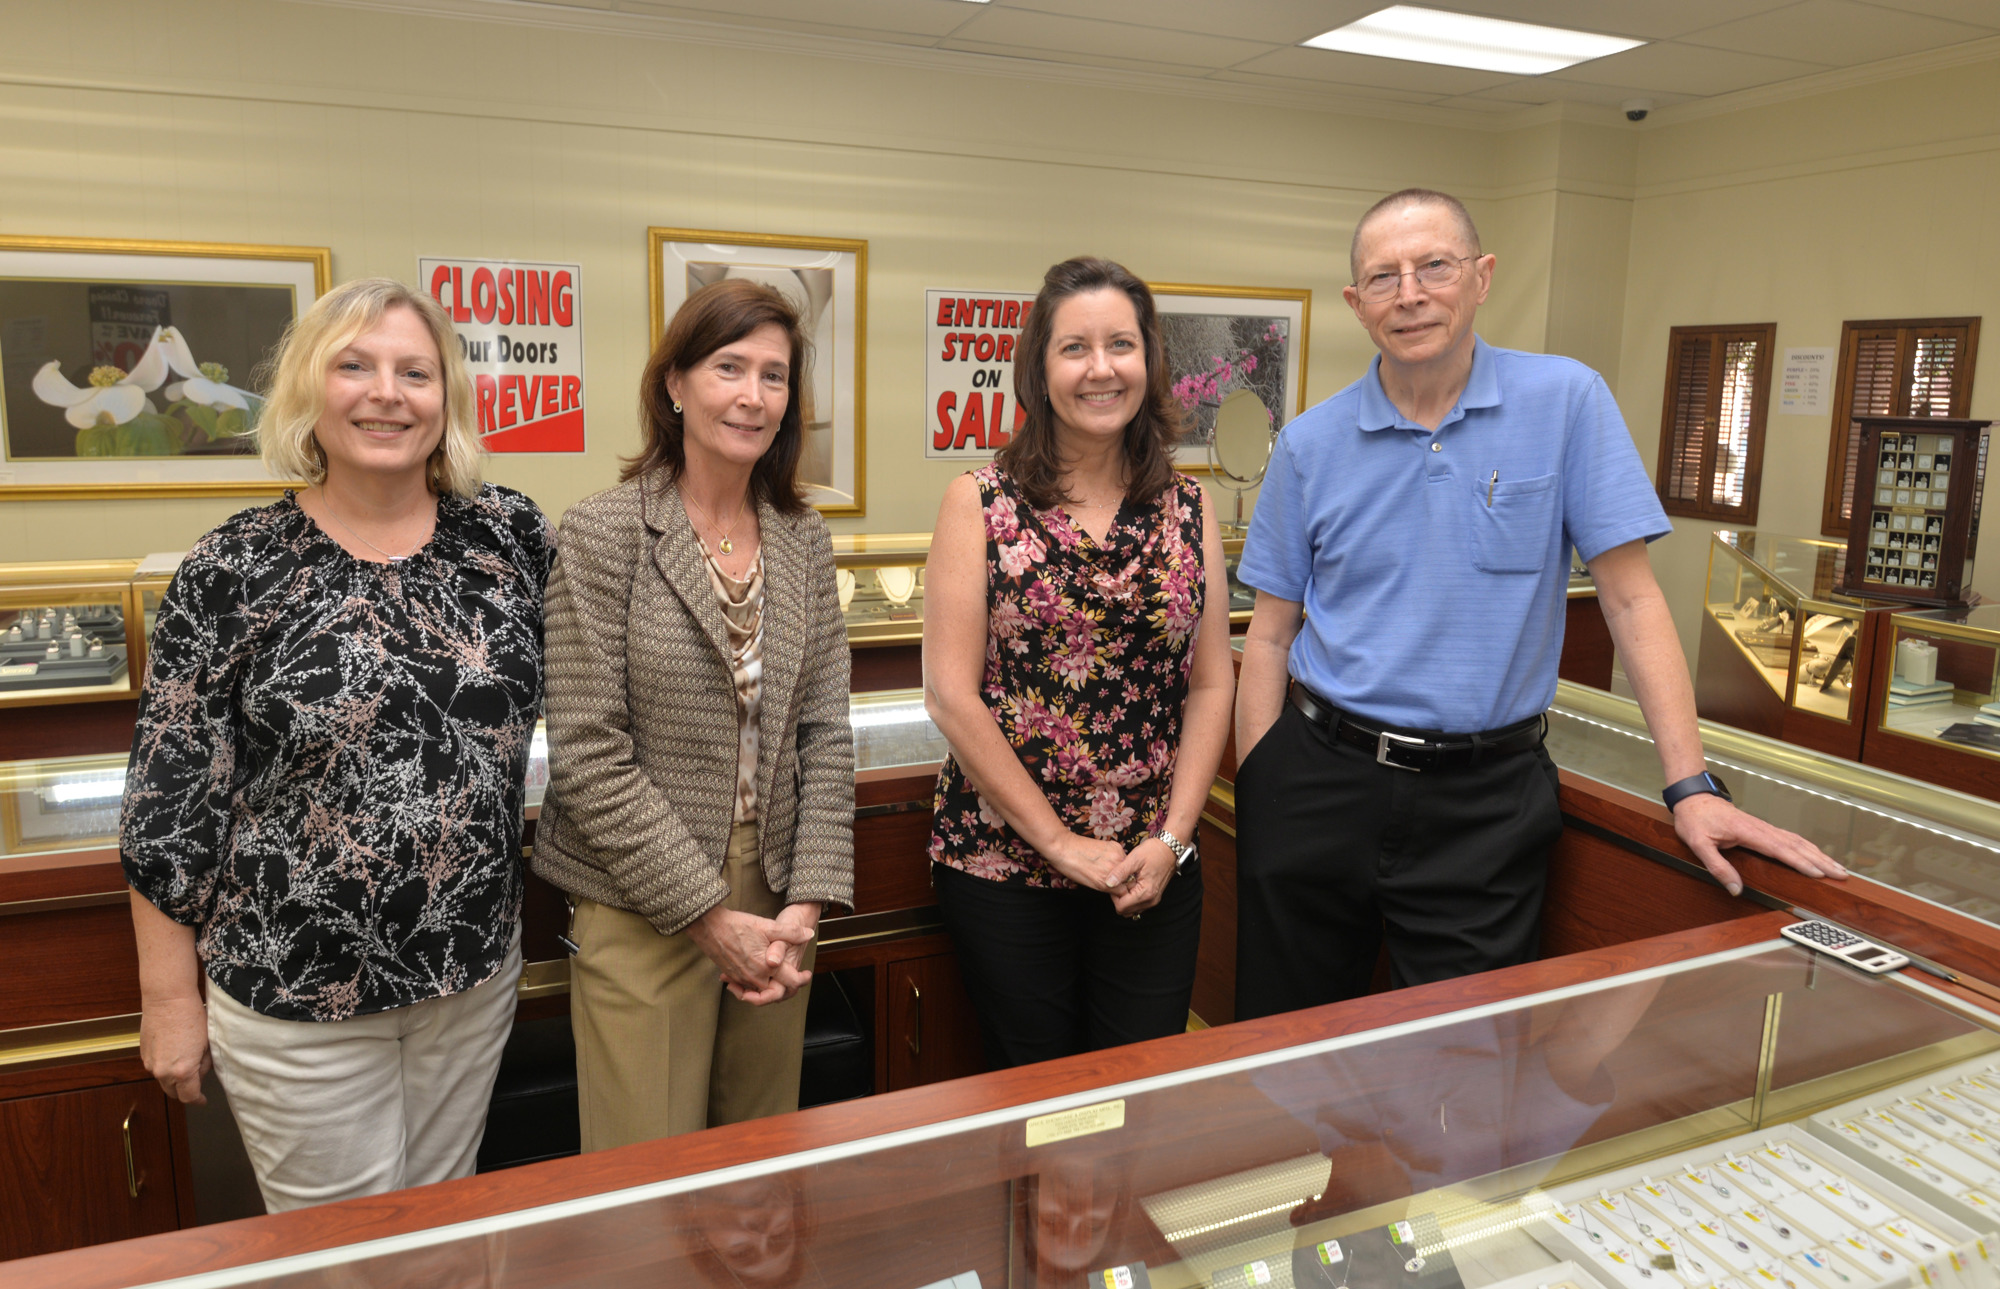 The Frazier Jewelry staff includes family members. From left, Merry Frazier, Gina Frazier, Kim Scott and owner Butch Frazier. Merry is Butch Frazier’s daughter and Gina is his sister.